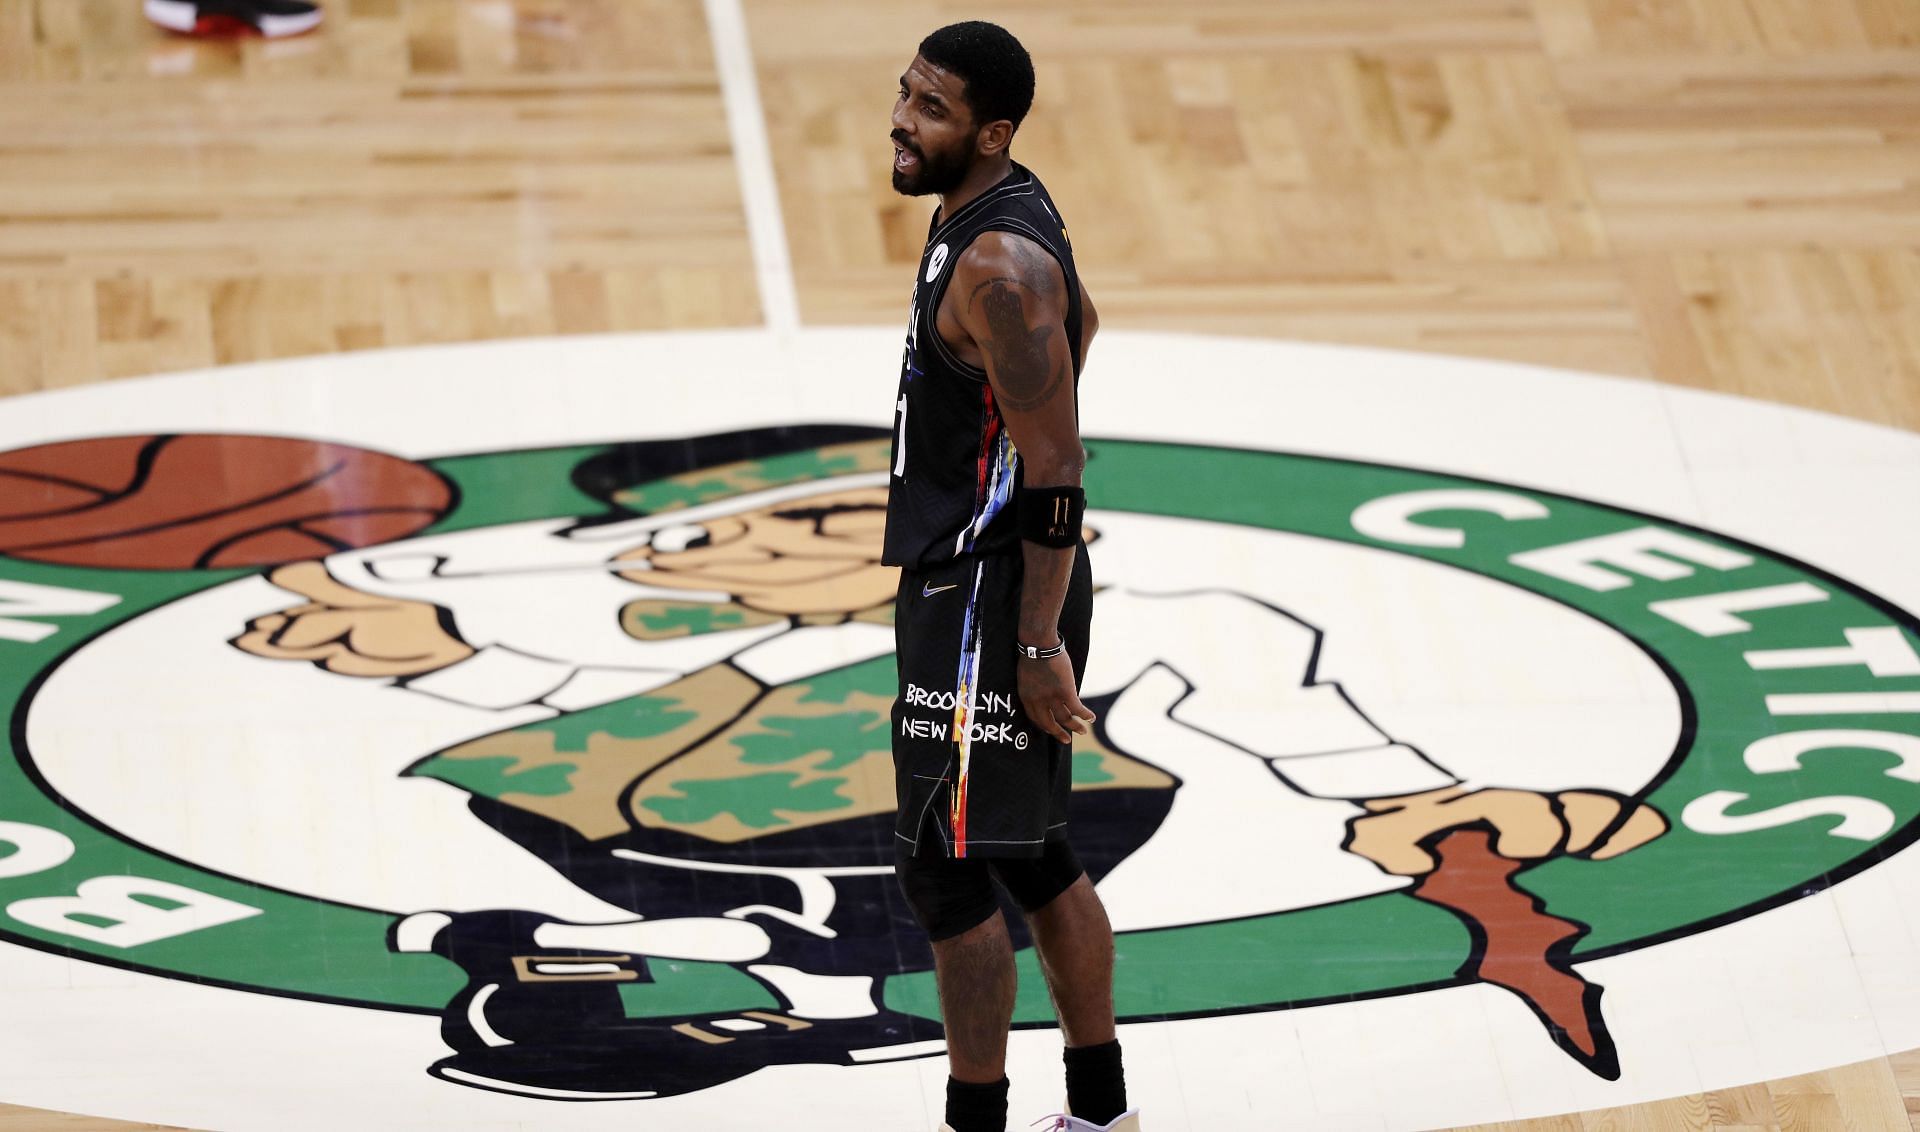 Irving&#039;s return to Boston in front of a packed crowd has led to heightened vitriol.